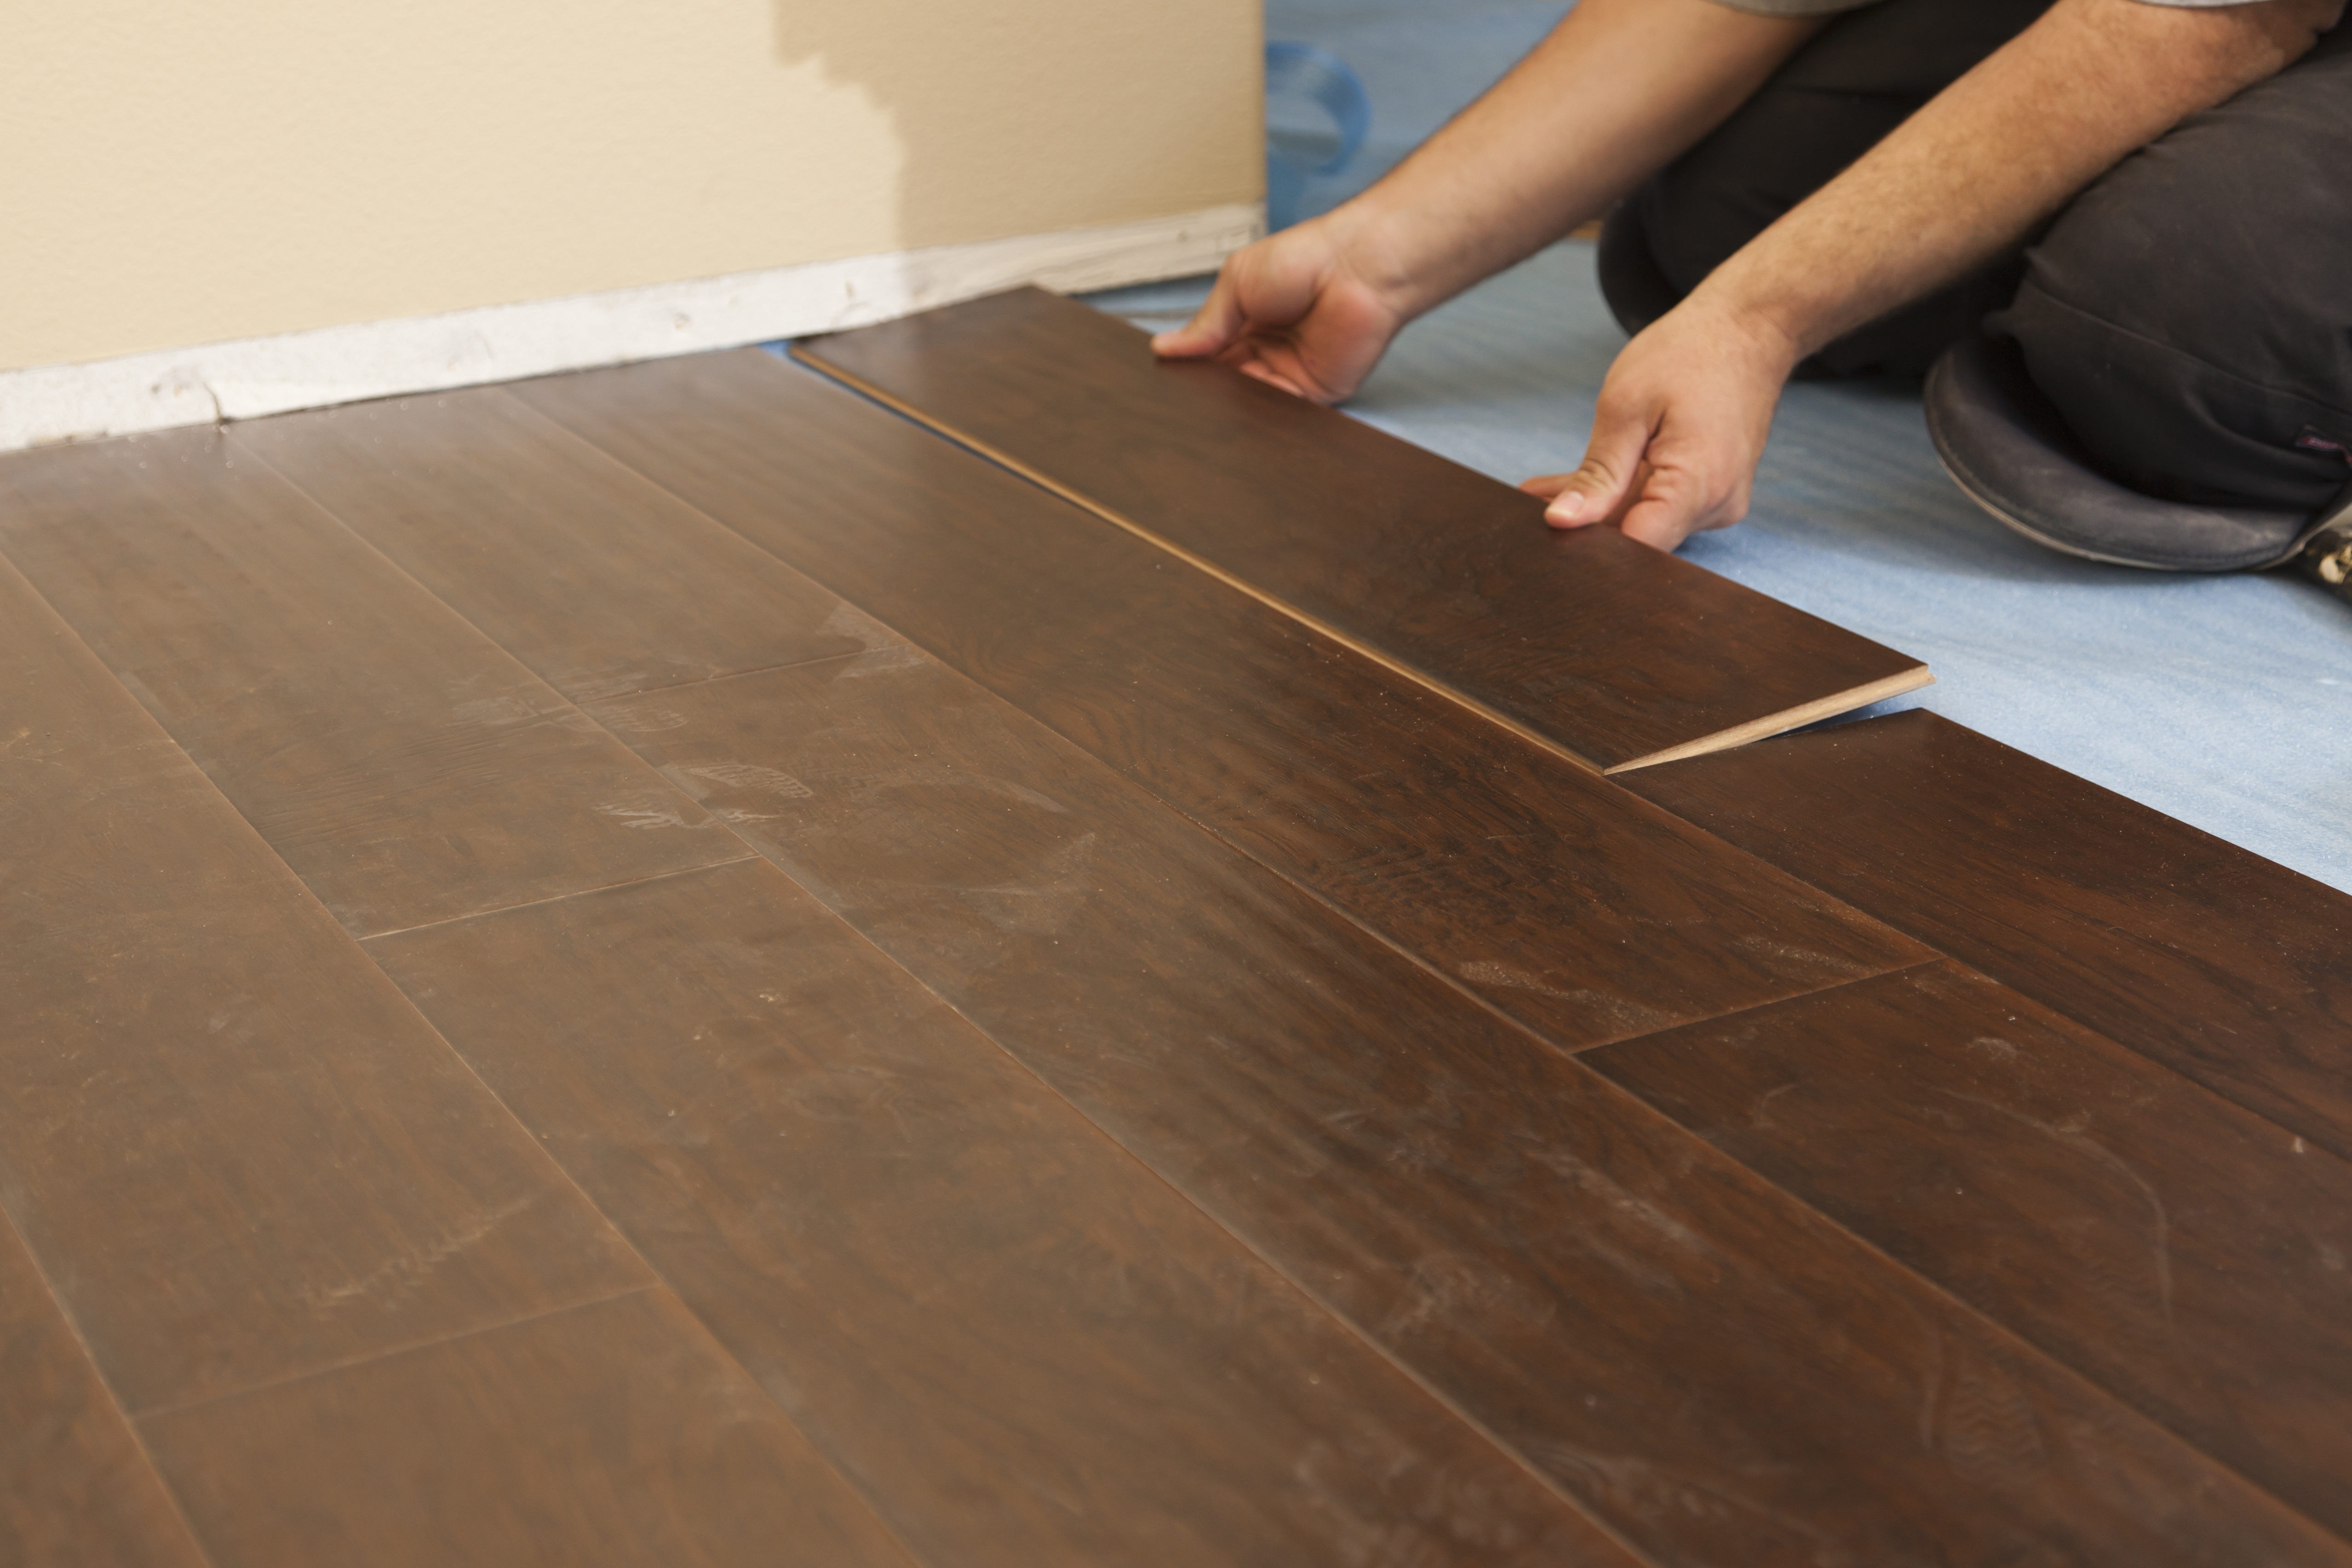 One of the Top-Rated Flooring Installers in Ottawa is kneeling down and interlocking a coffee coloured click system tongue and groove laminate flooring product together.